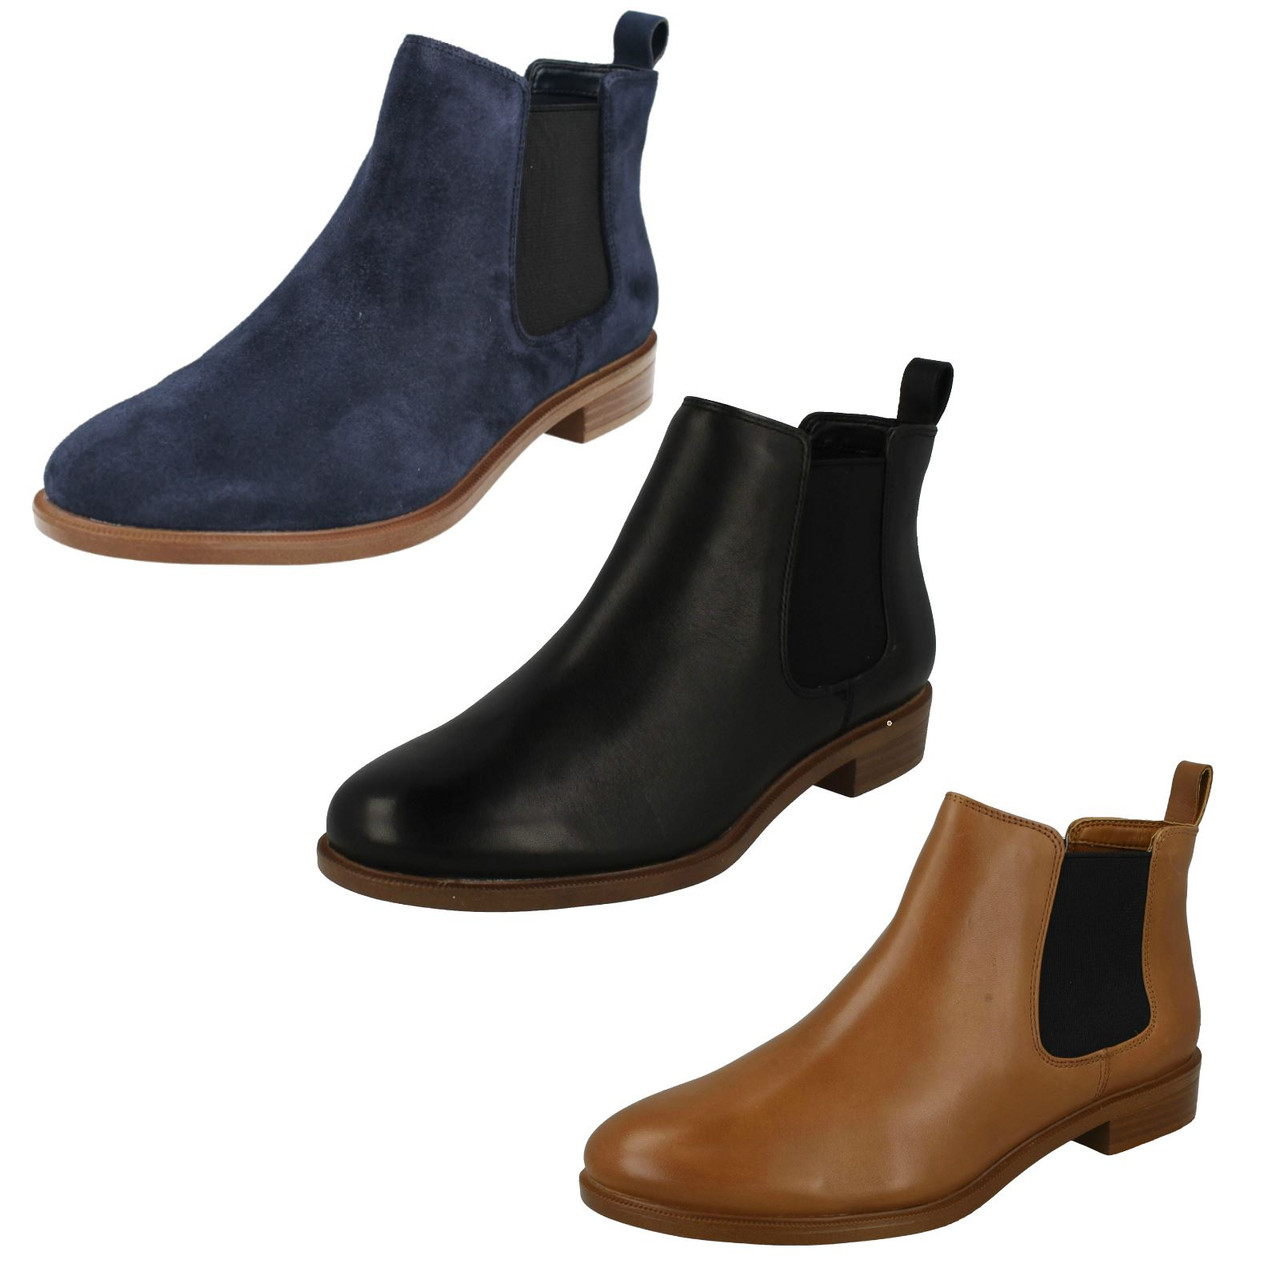 Tilbageholdenhed Nedgang twinkle Ladies Clarks Chelsea Boots Taylor Shine